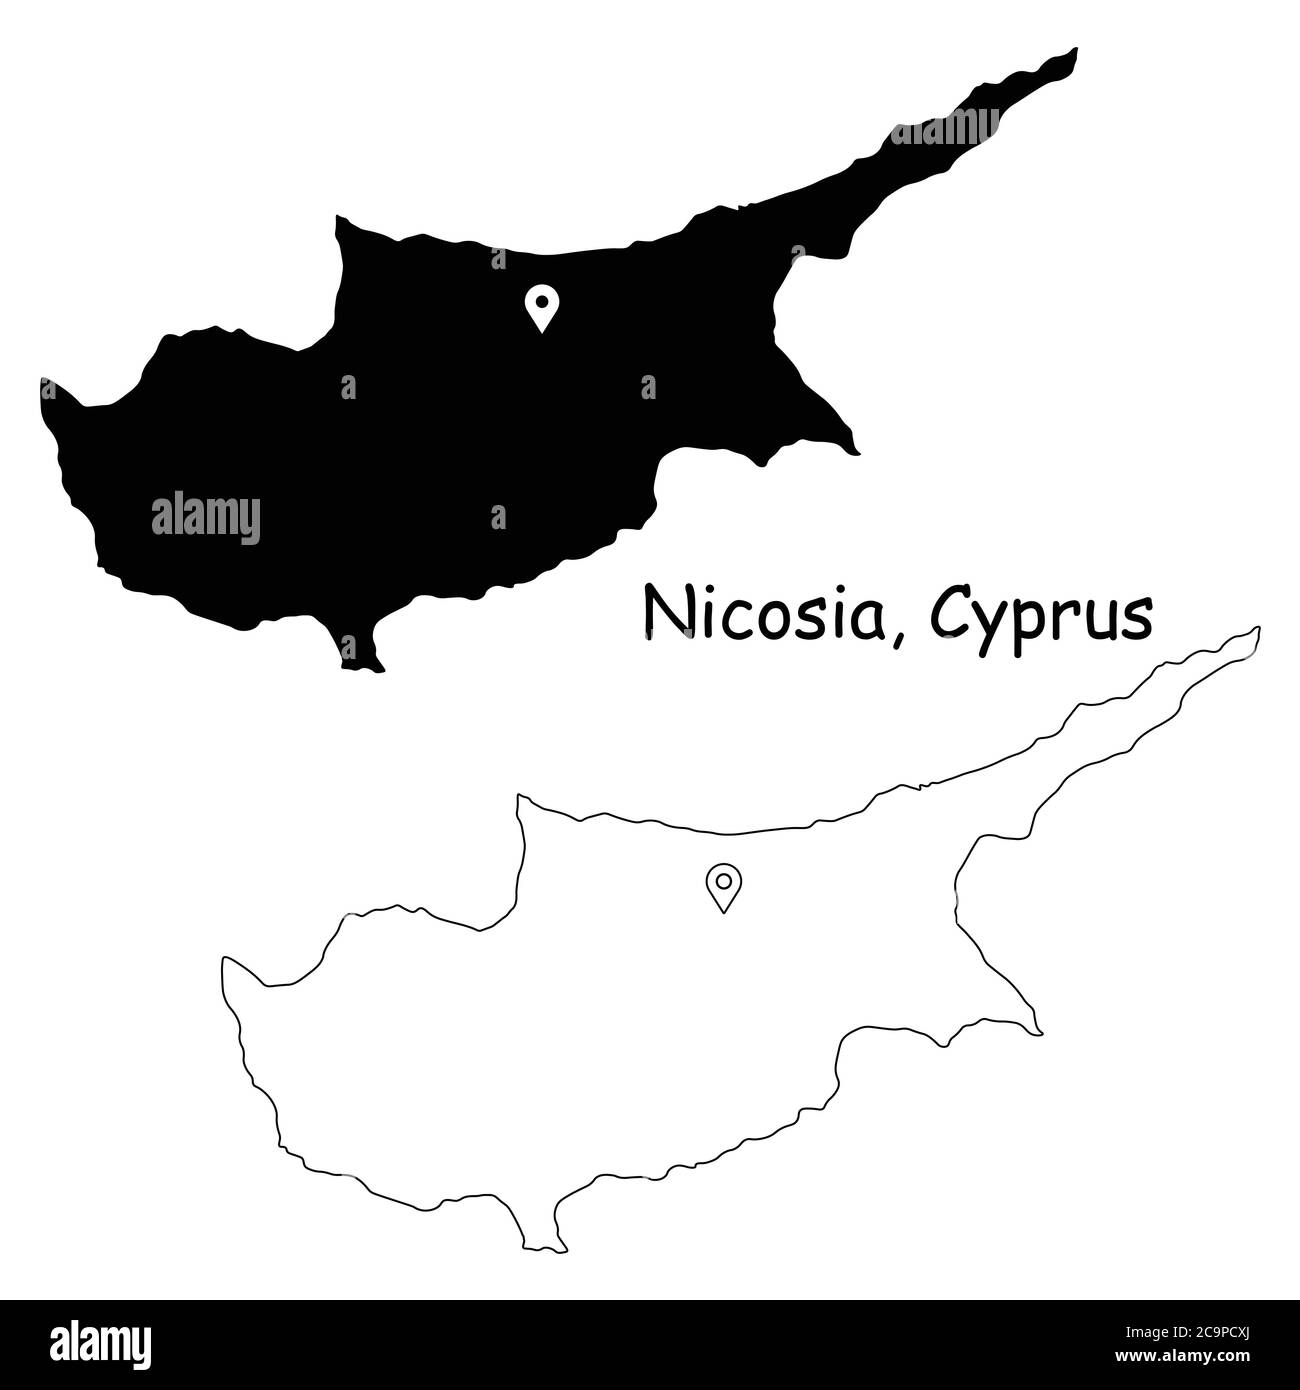 Nicosia Cyprus. Detailed Country Map with Location Pin on Capital City. Black silhouette and outline maps isolated on white background. EPS Vector Stock Vector